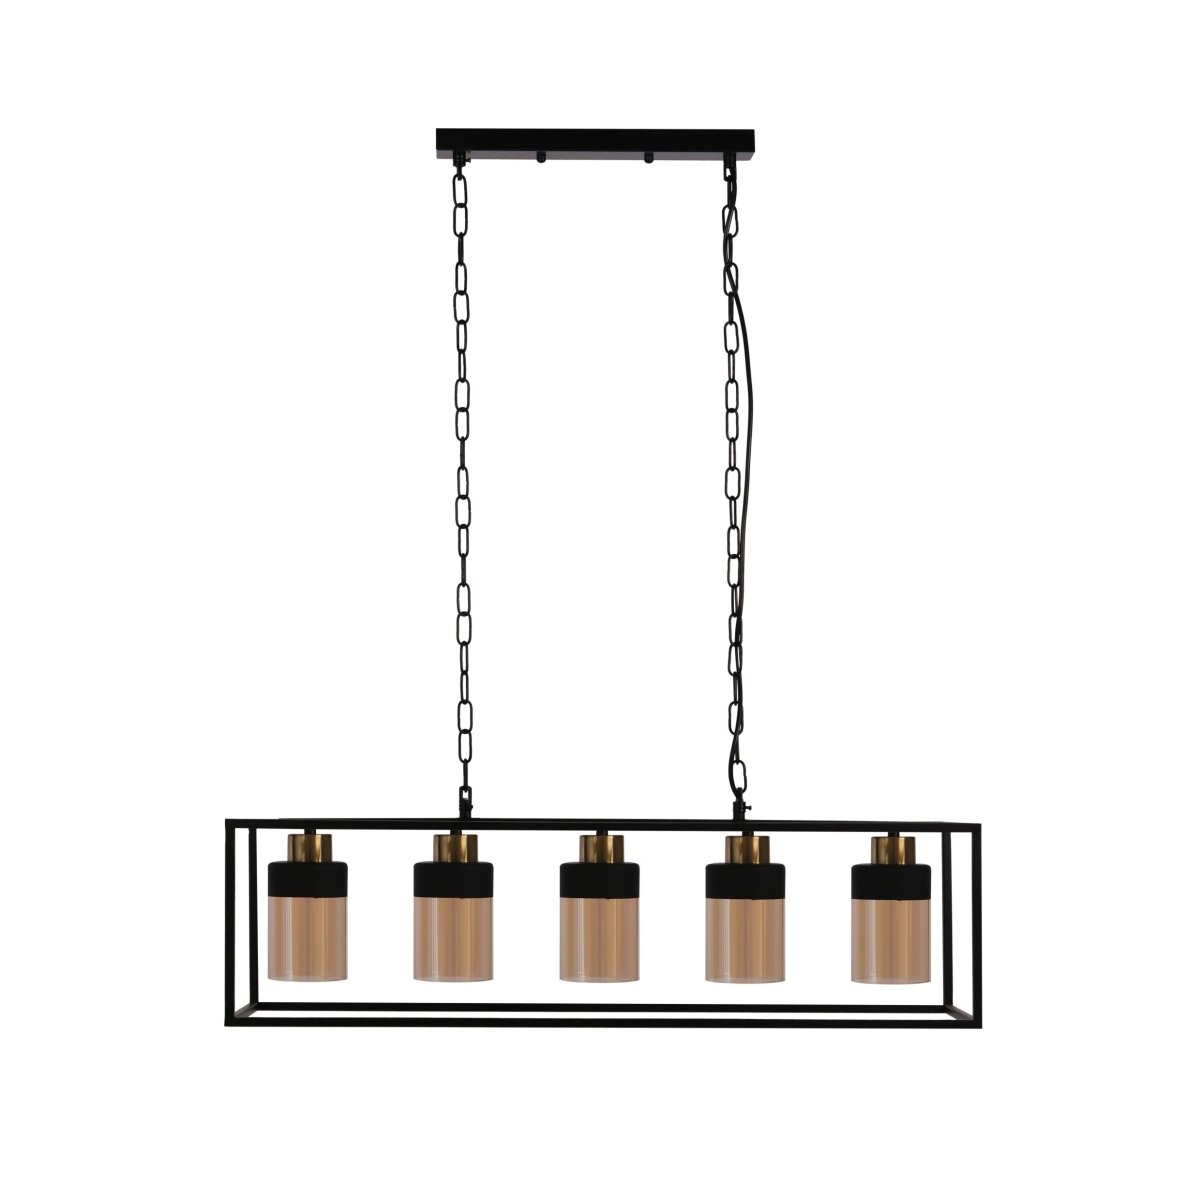 Main image of Amber Glass Black Metal Body Island Chandelier with 5xE27 Fitting | TEKLED 159-17398